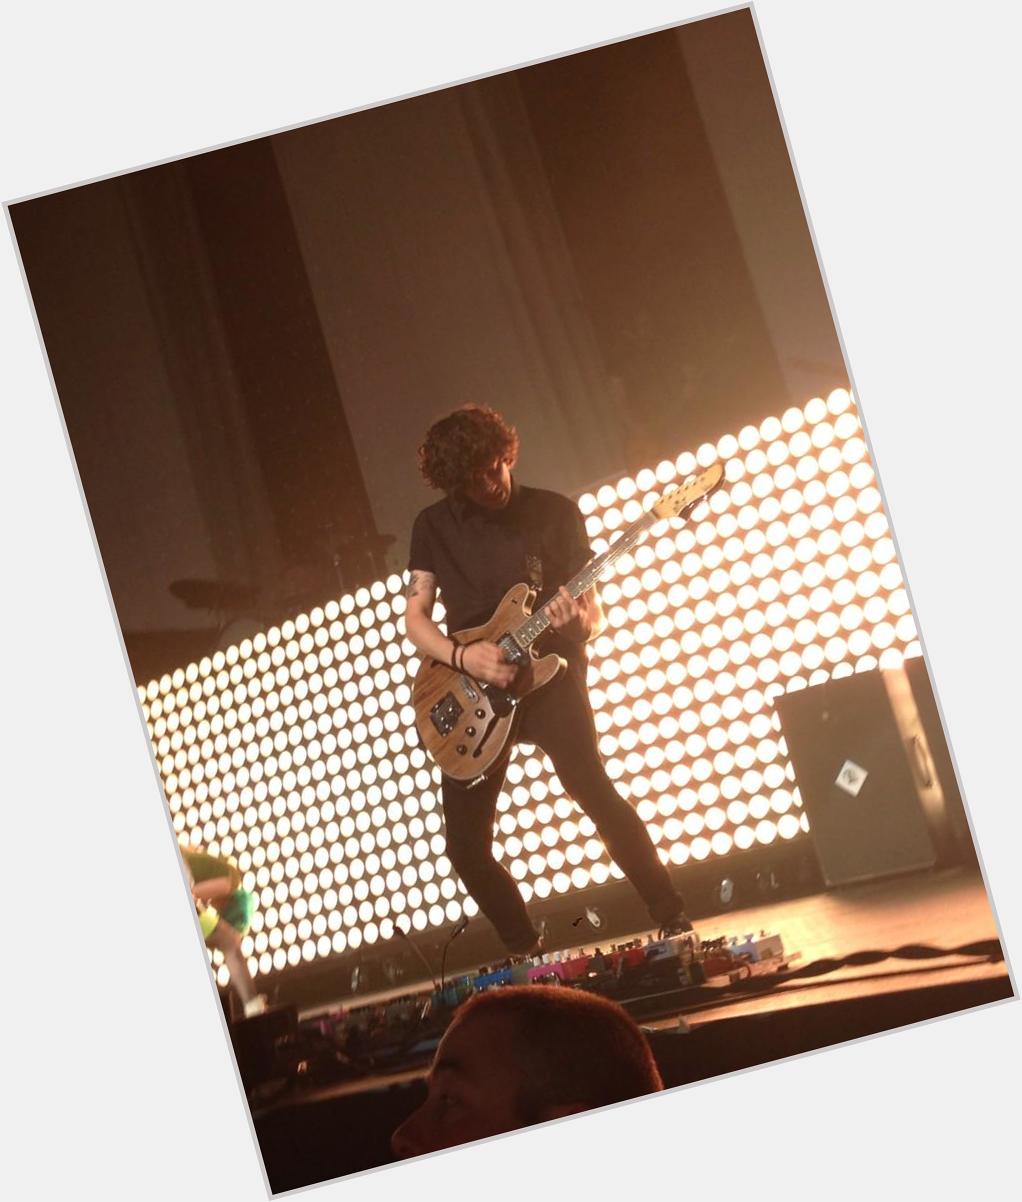 Happy Birthday Taylor York! I was lucky enough to have taken this photo, myself. 